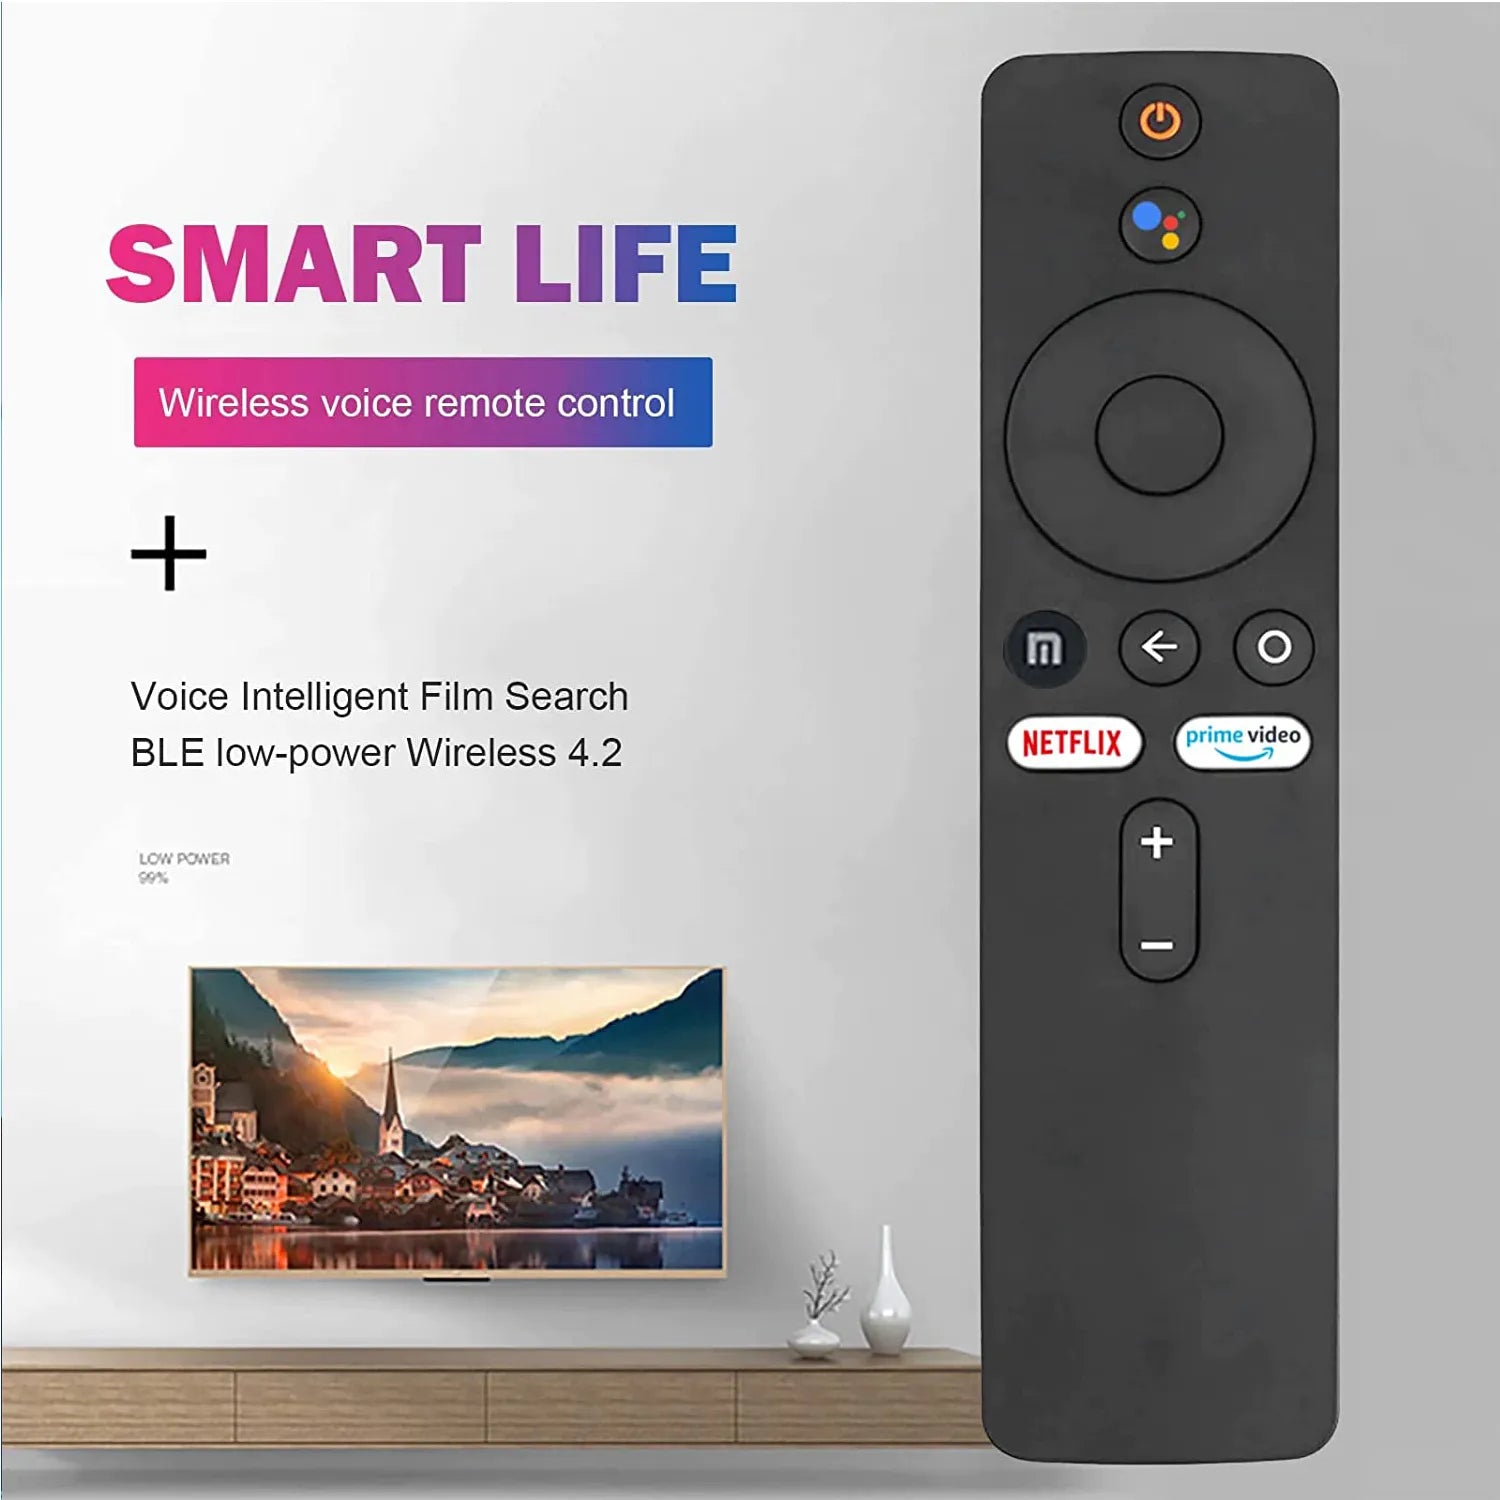 Muvit Smart TV Remote Control with Voice Control for MI TV